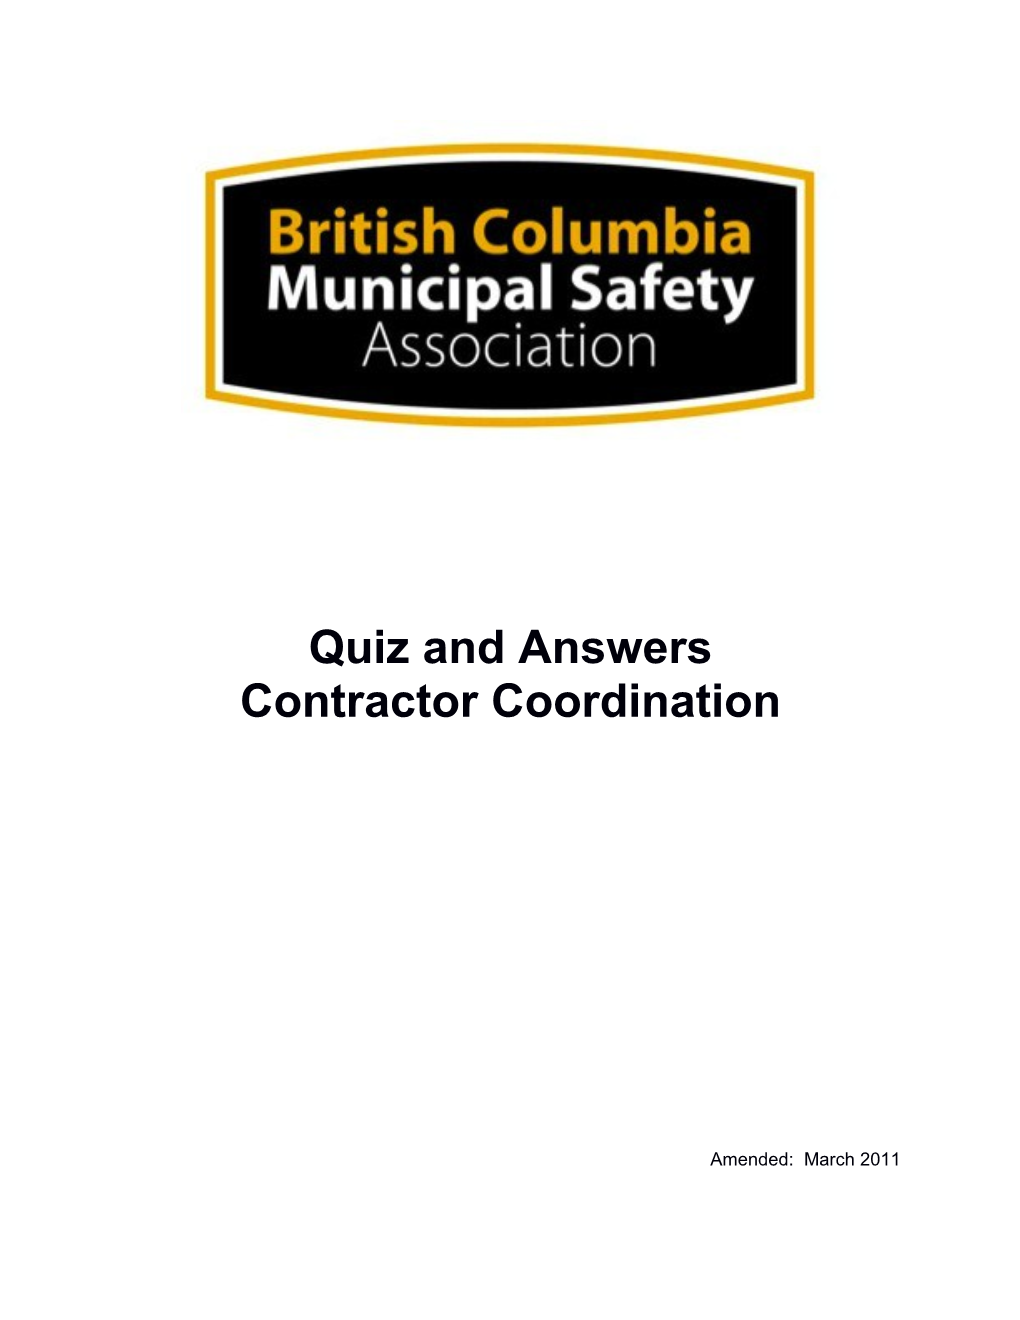 Contractor Coordination Quiz and Answers